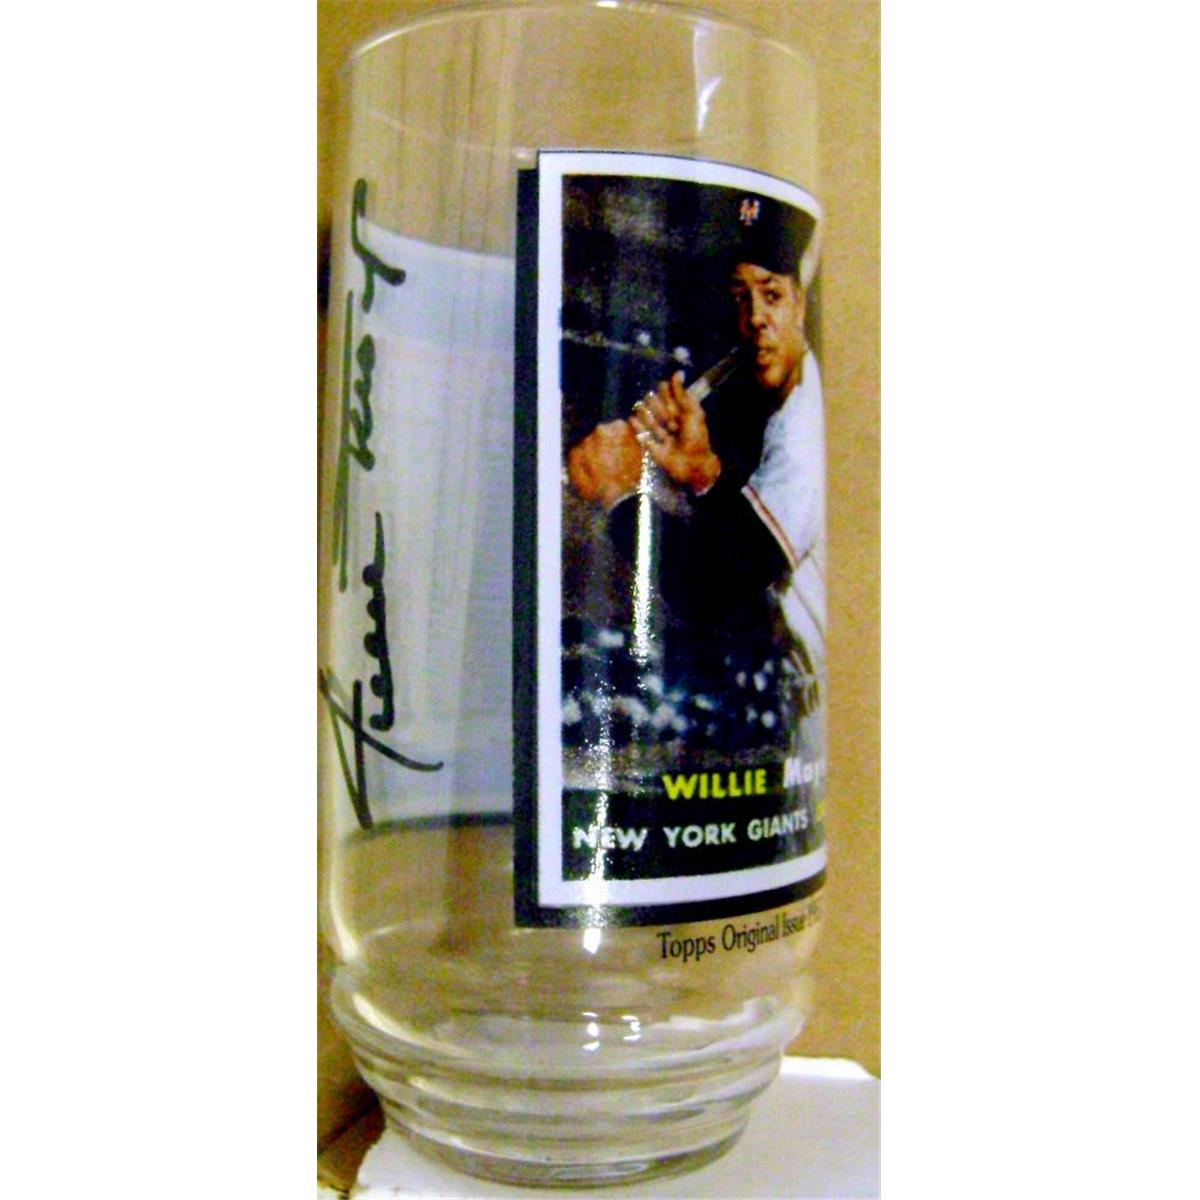 583005 New York Giants Willie Mays Drinking Glass - 1993 Coca Cola McDonalds -  Autograph Warehouse